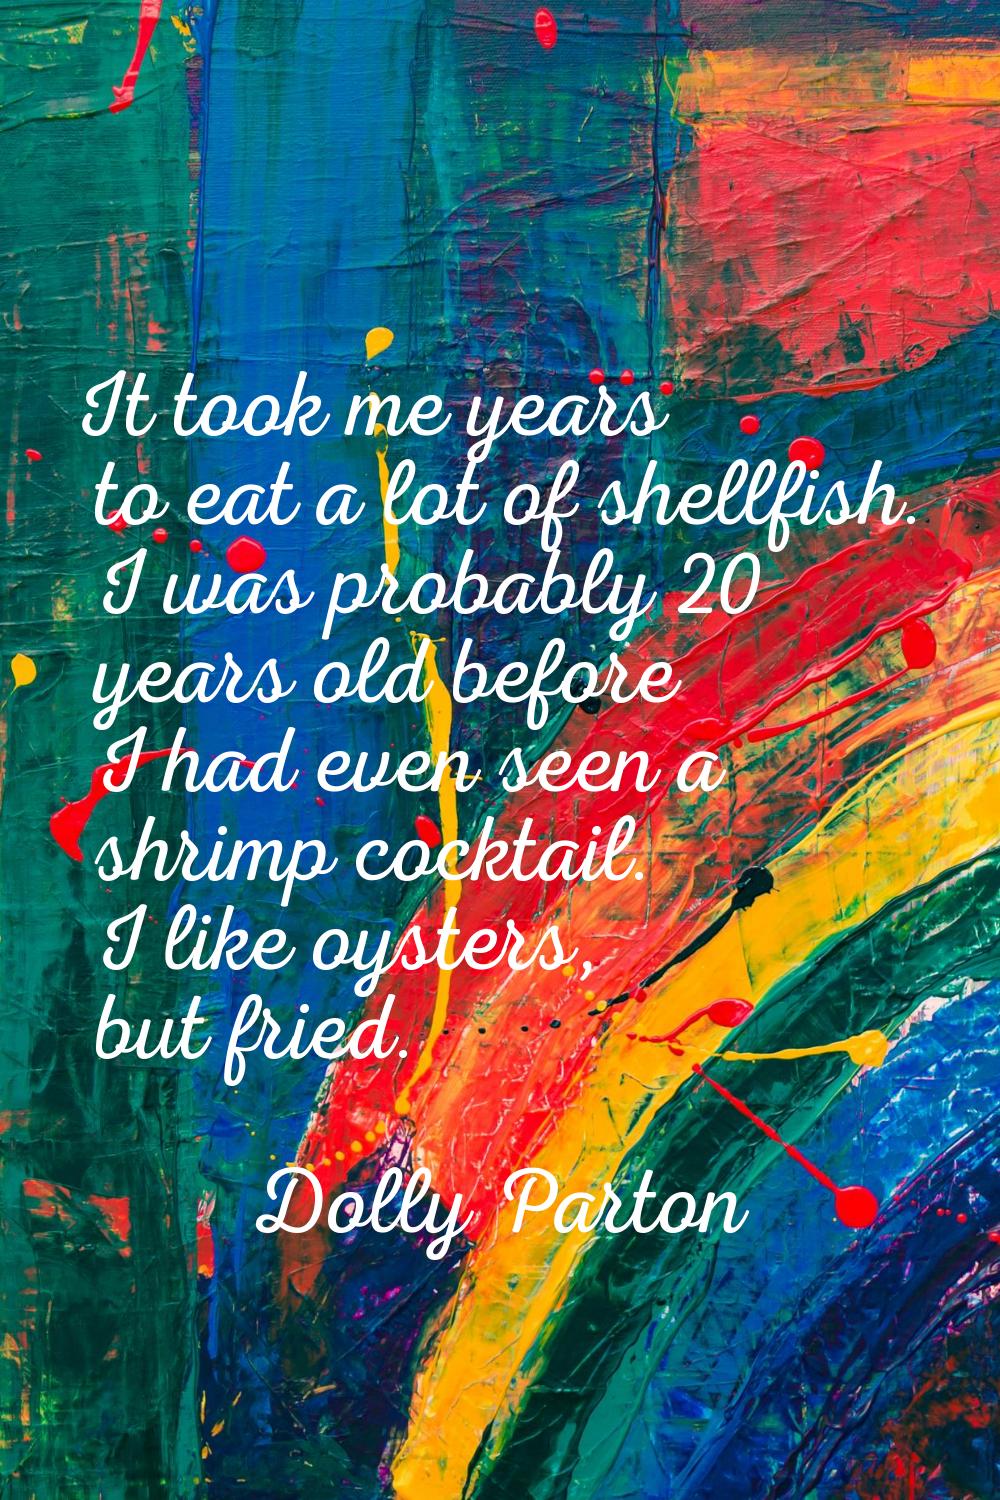 It took me years to eat a lot of shellfish. I was probably 20 years old before I had even seen a sh